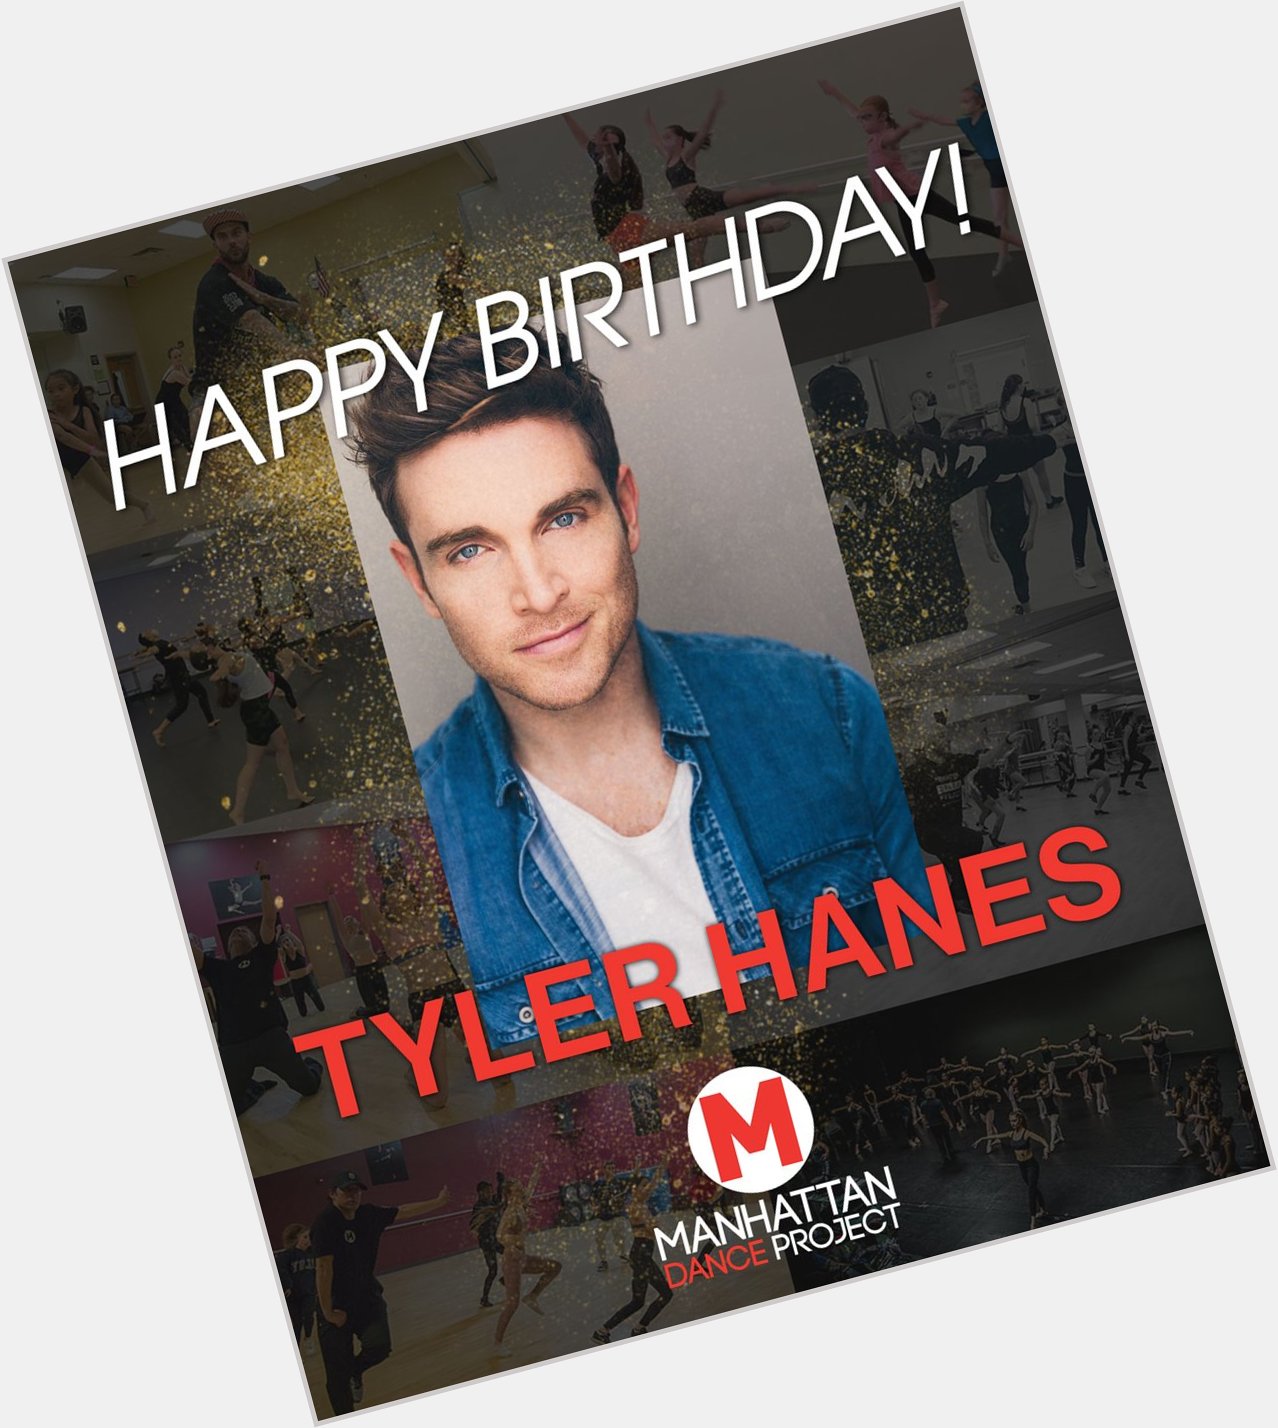 Join us today in wishing Tyler Hanes a Happy Birthday!  